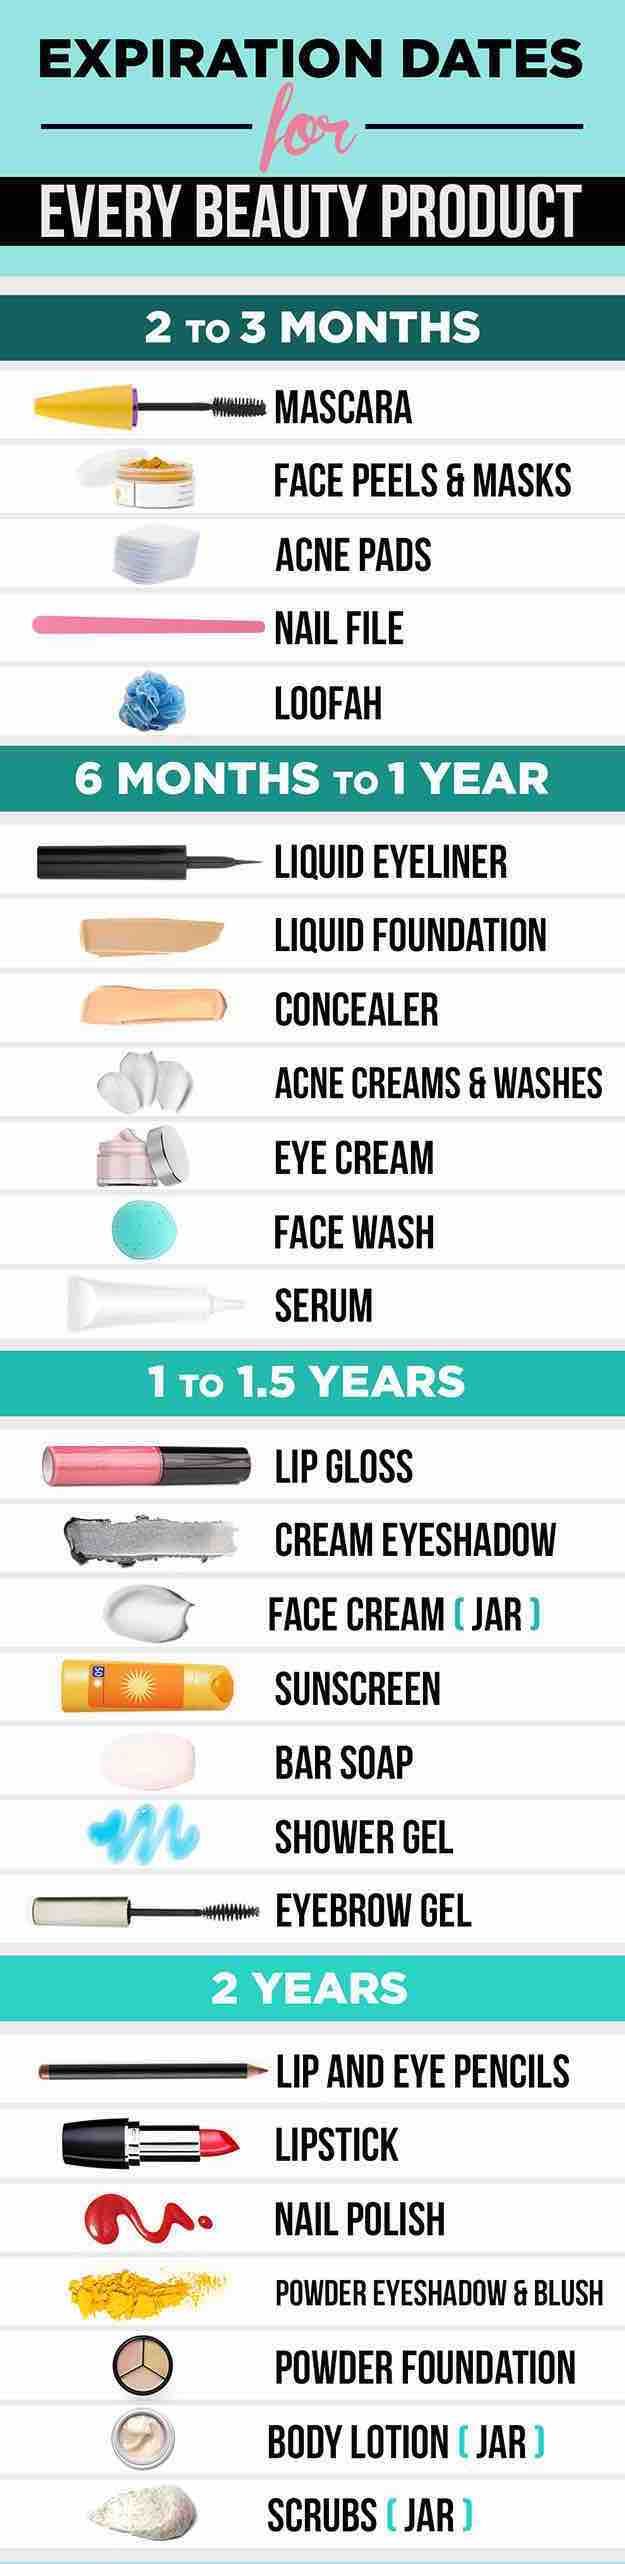 Expiration Dates | How To Spring Clean Beauty Products...